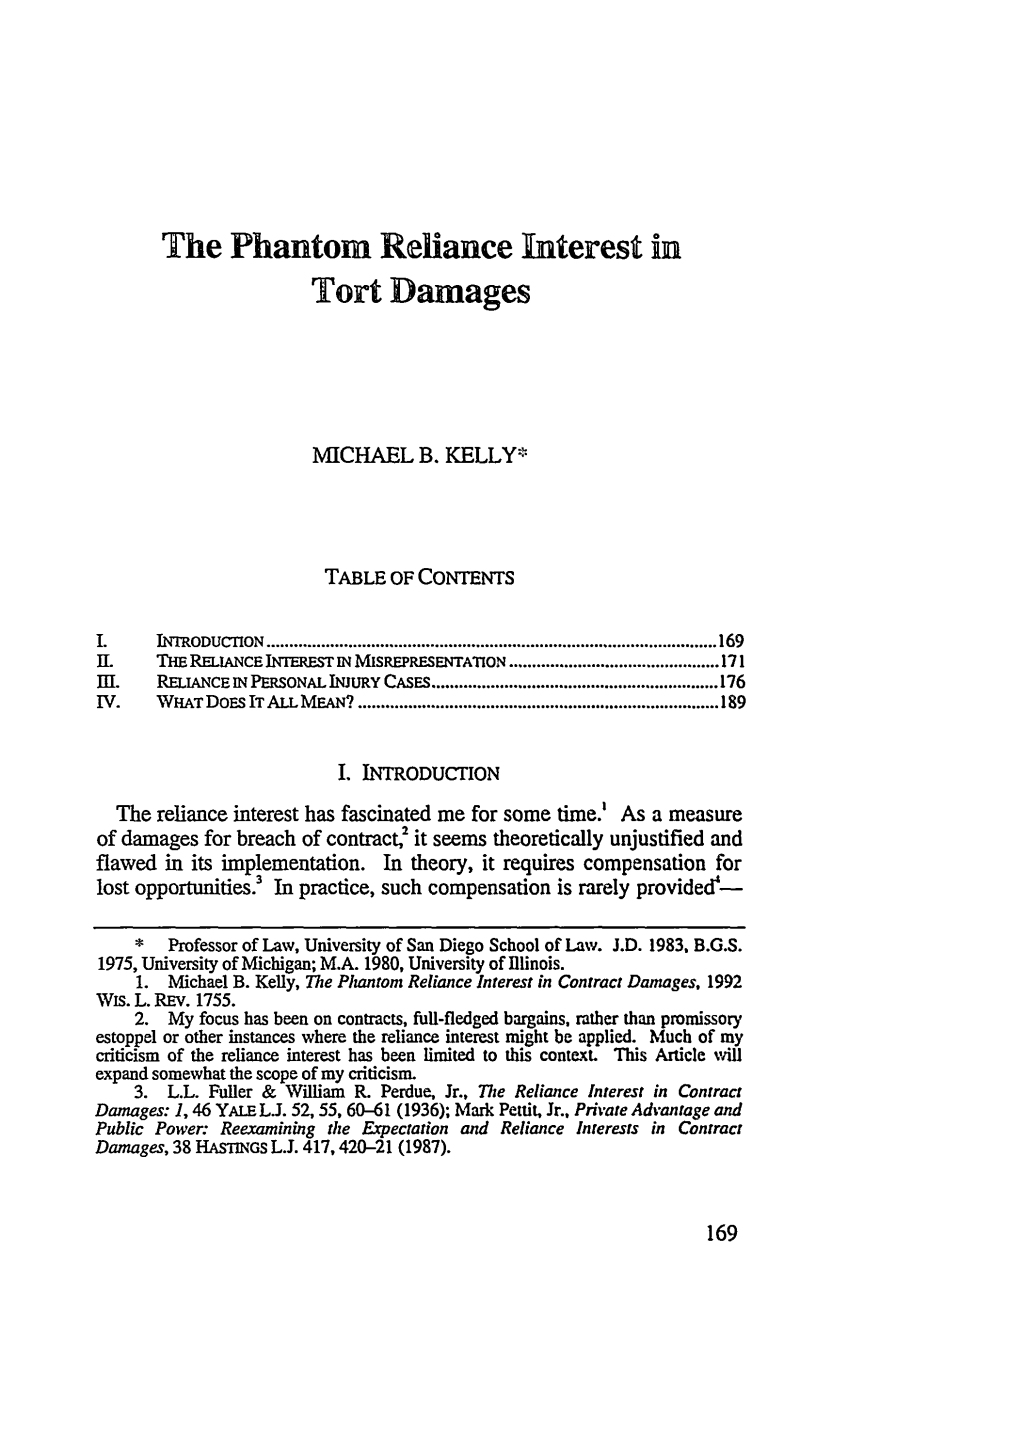 The Phantom Reliance Interest in Tort Damages